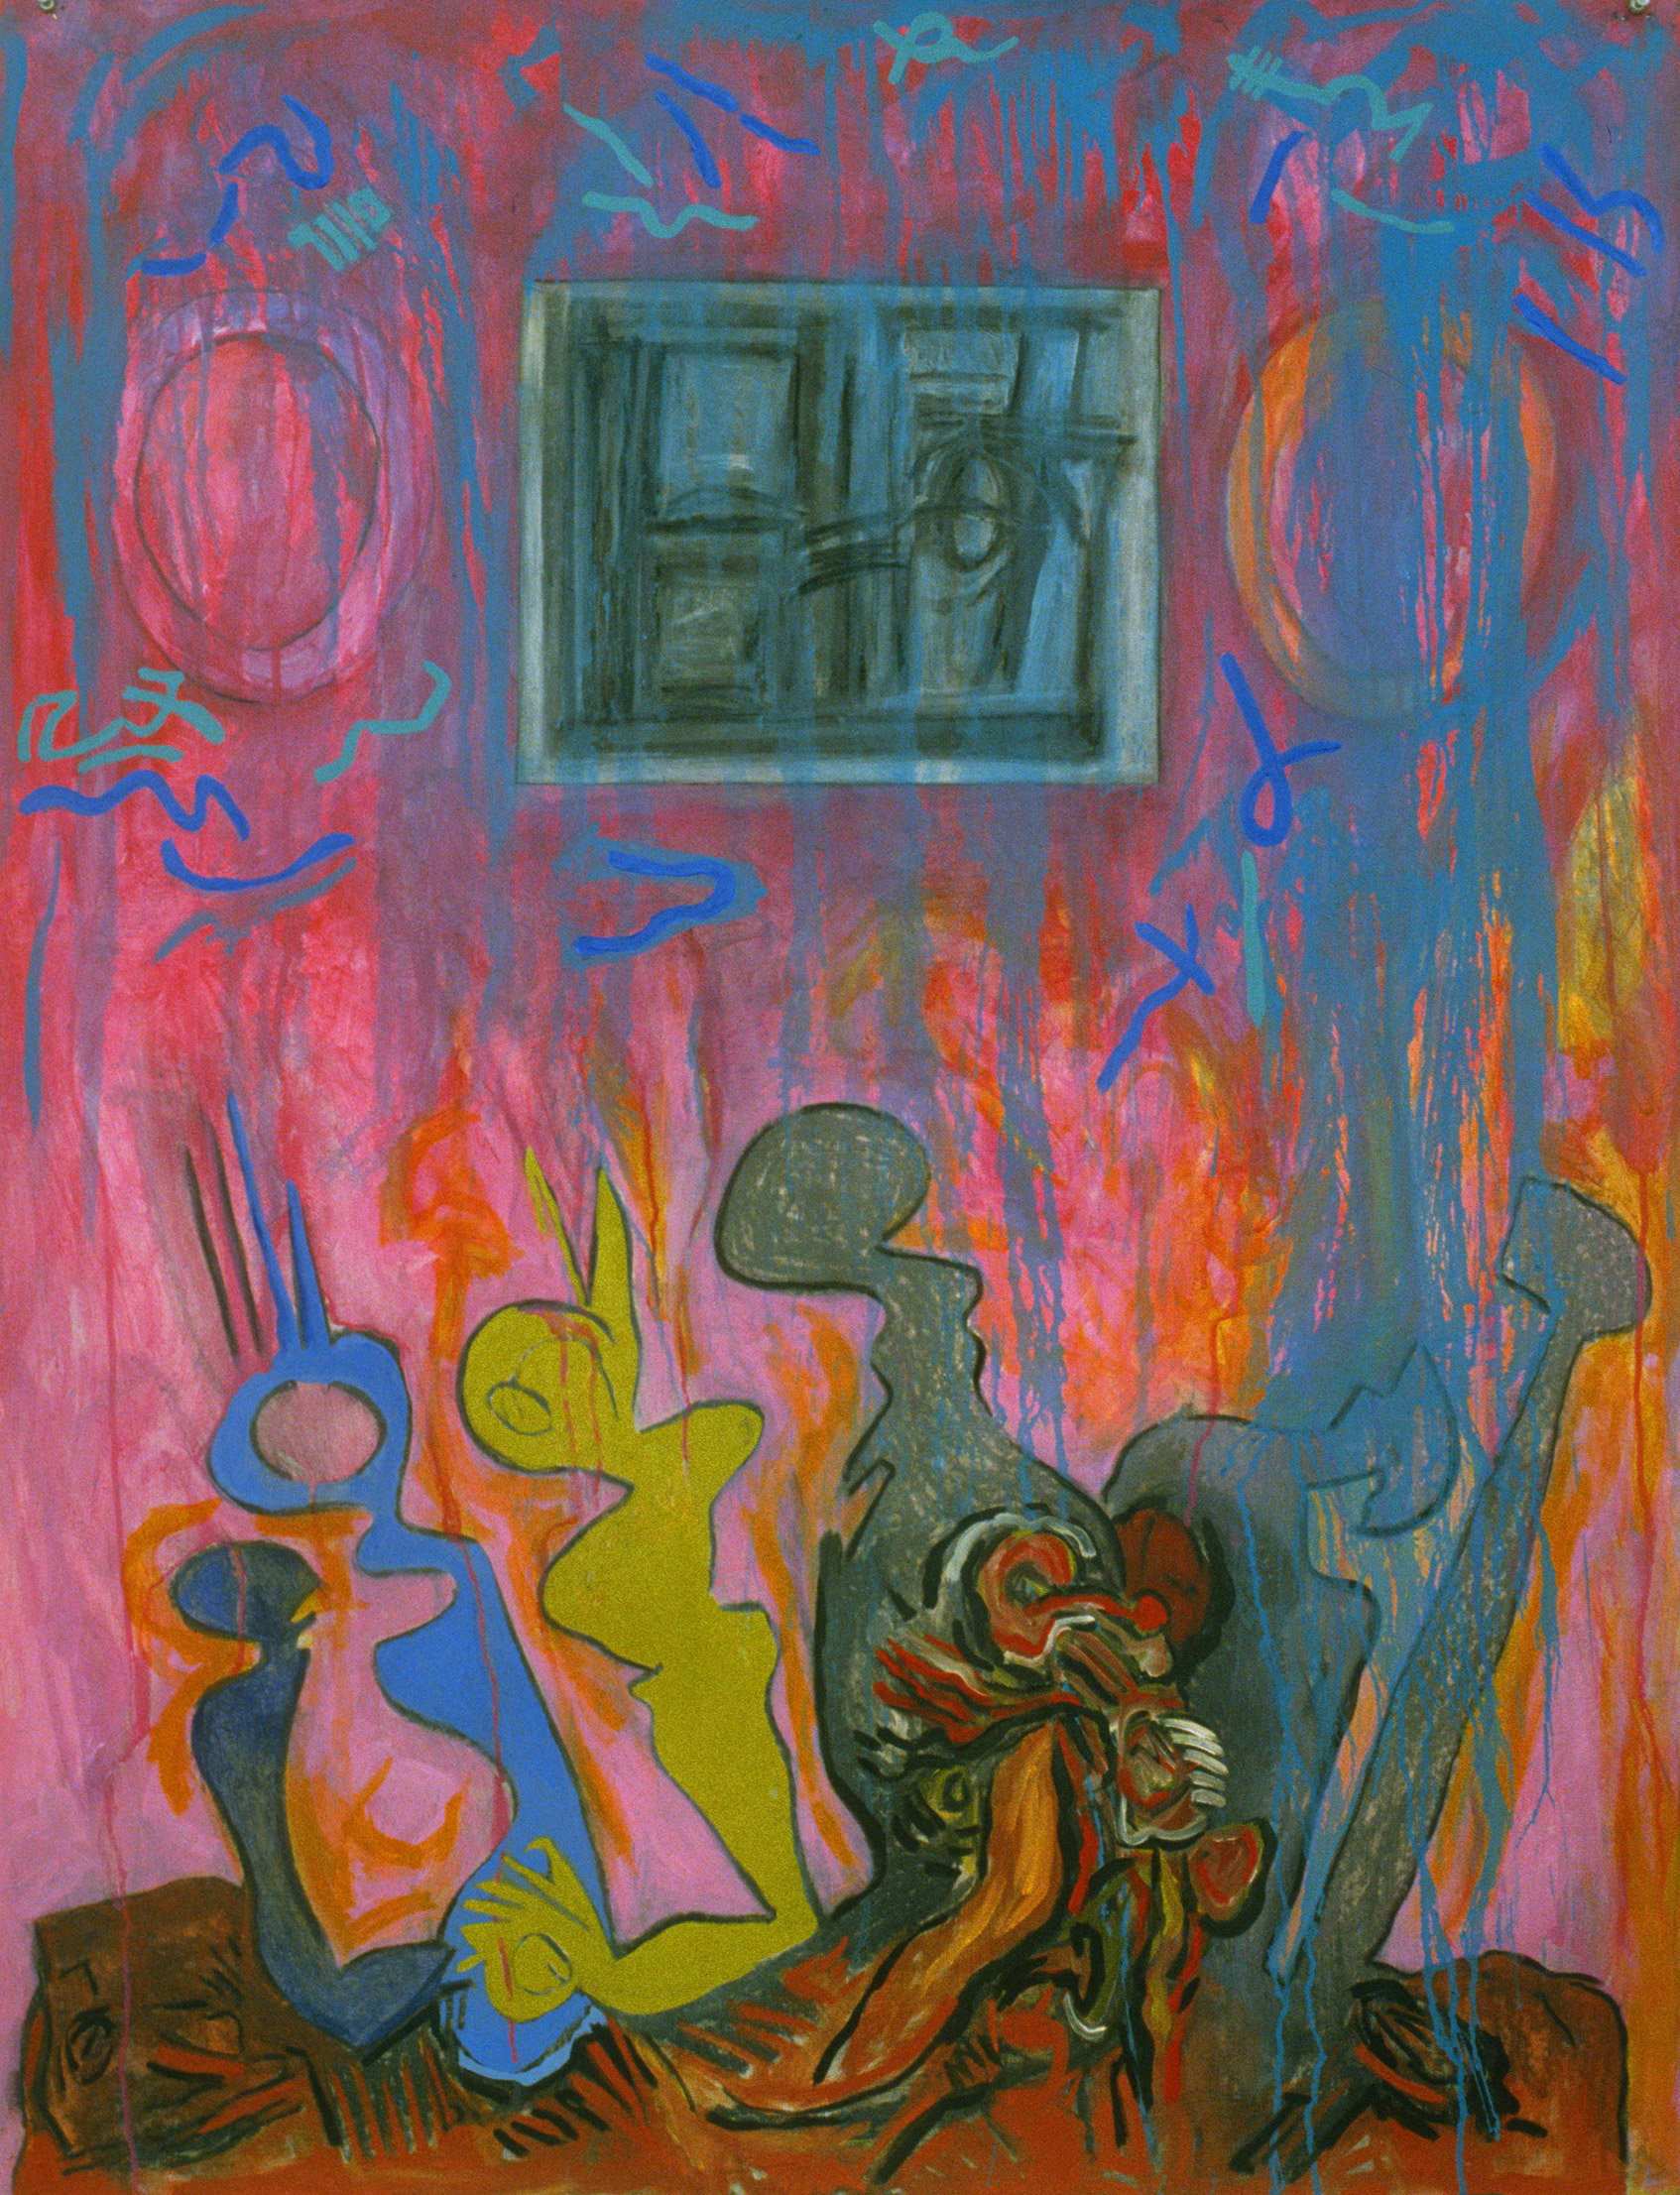 Make Believe No.3, 1988 | 50" x 40" | Acrylic & Oil on Paper